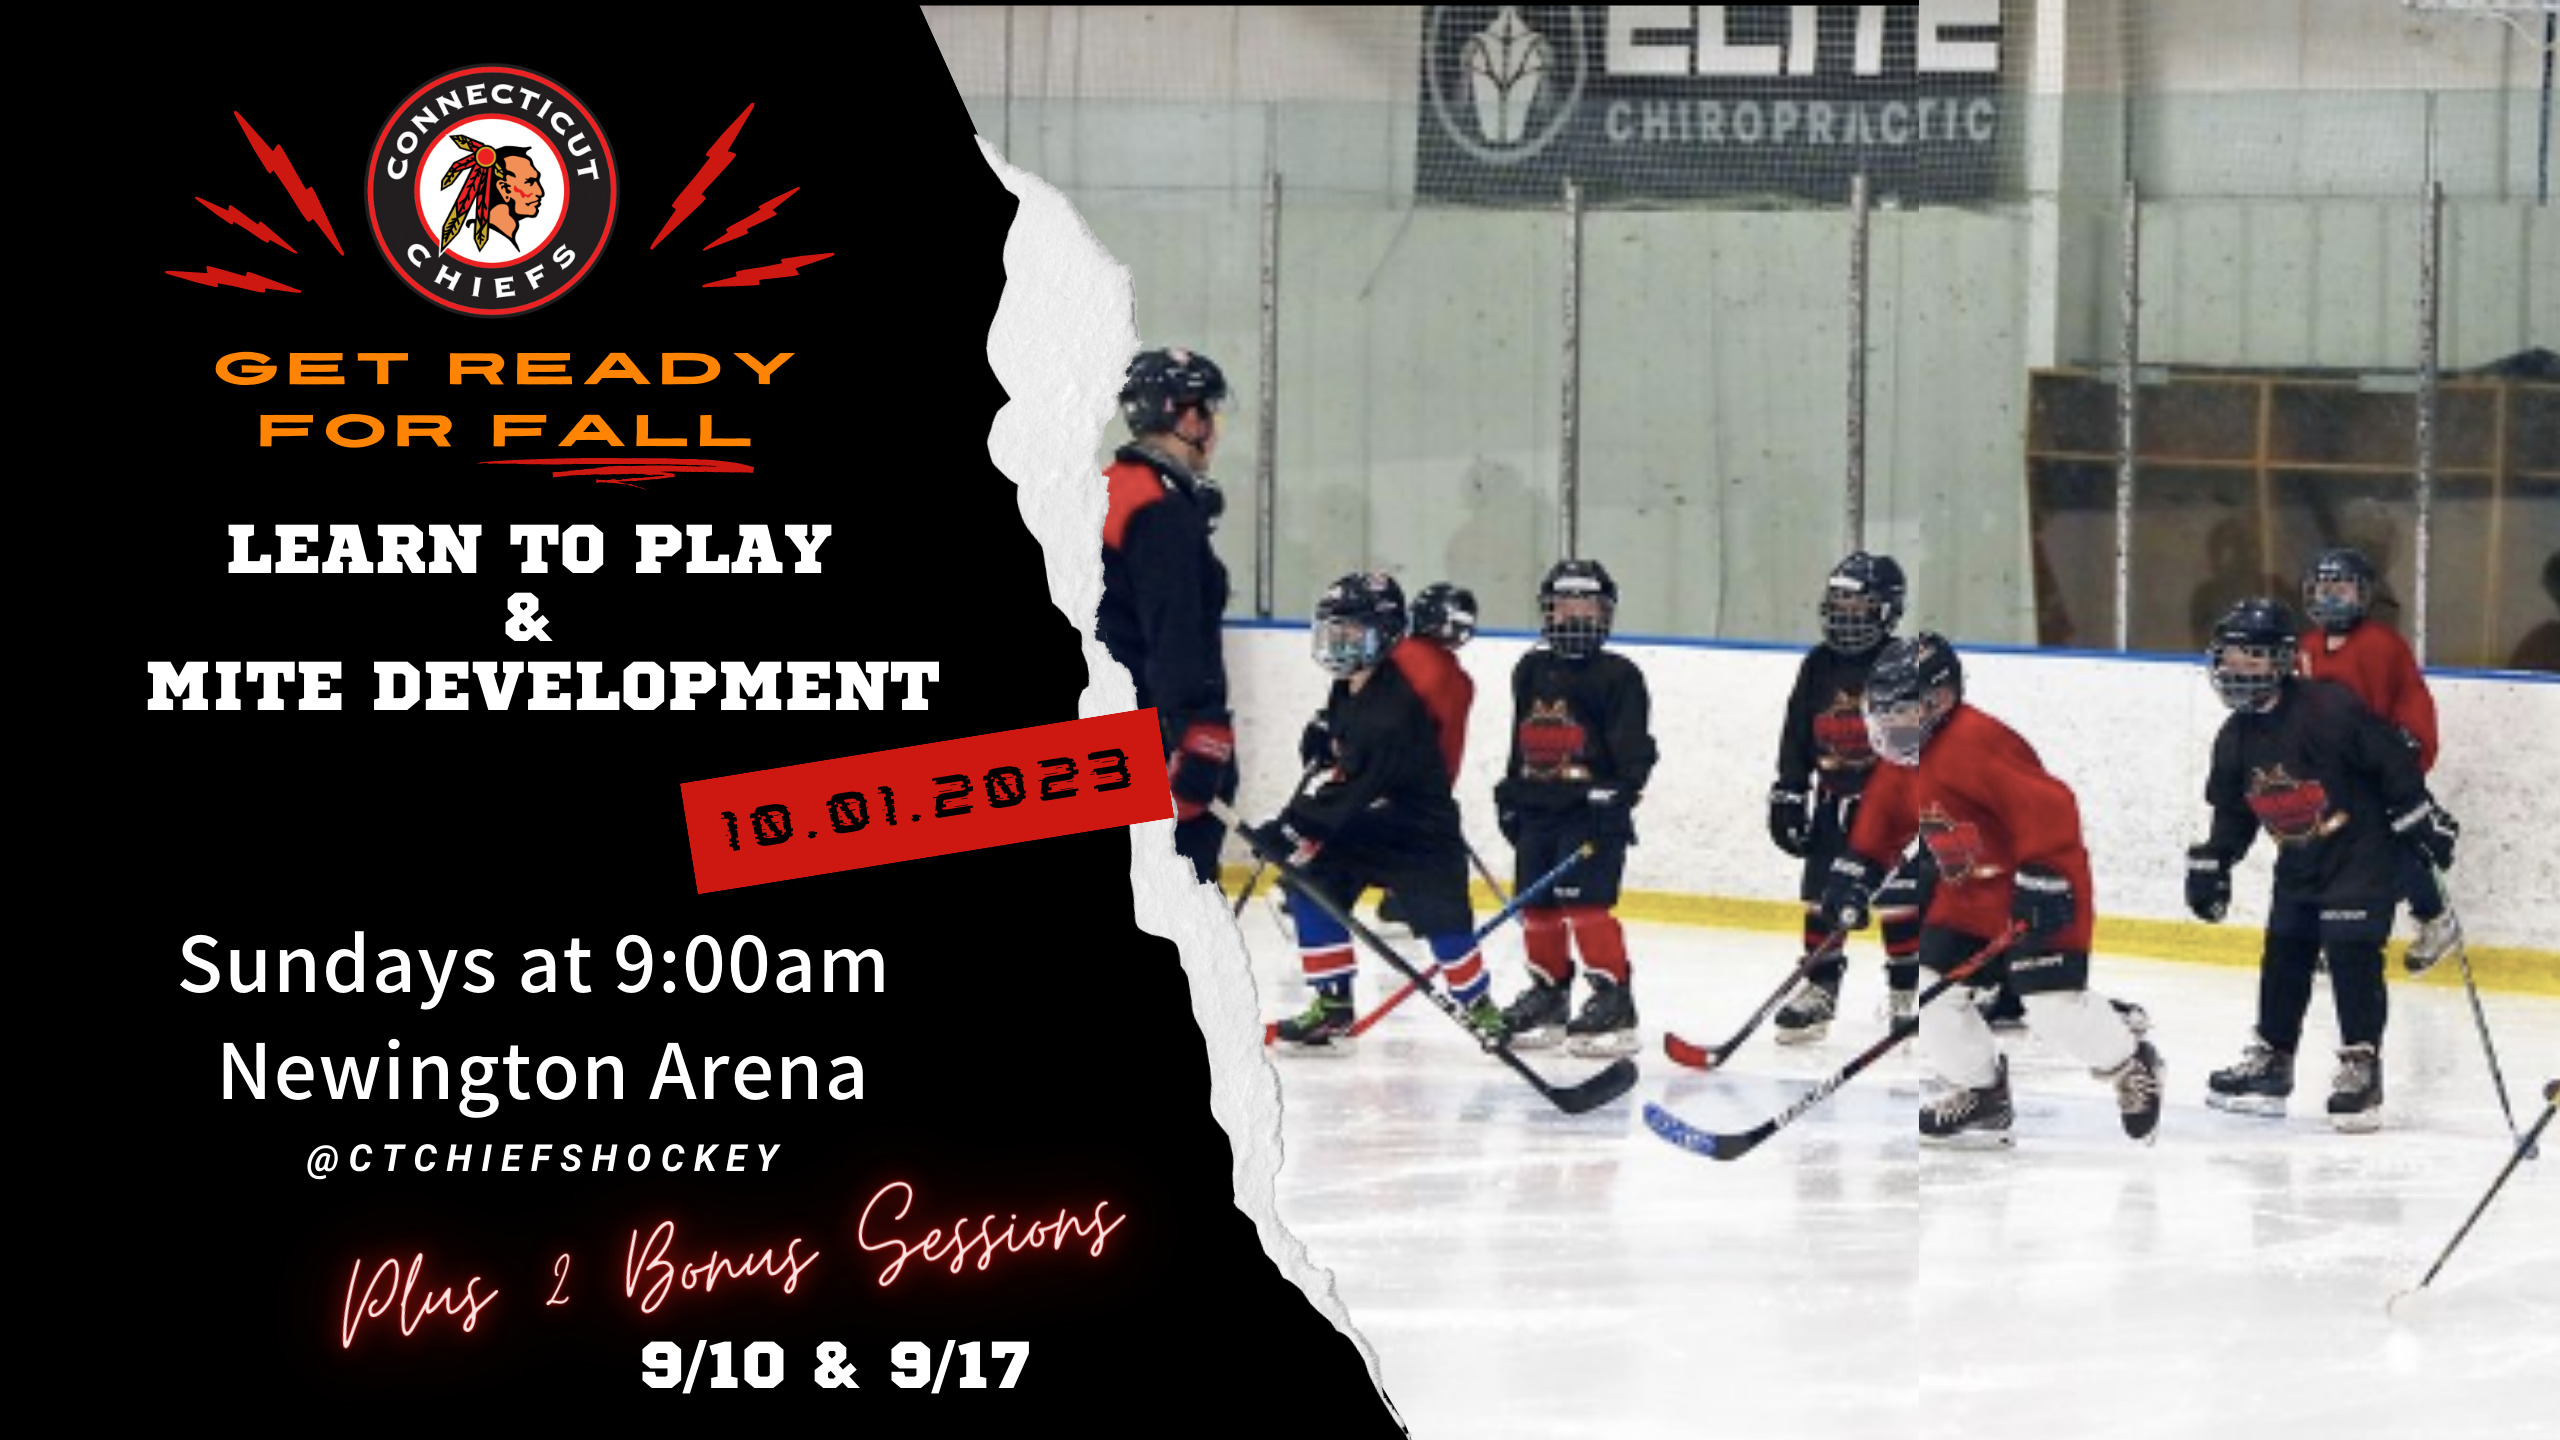 Learn to skate and mite development for young hockey players